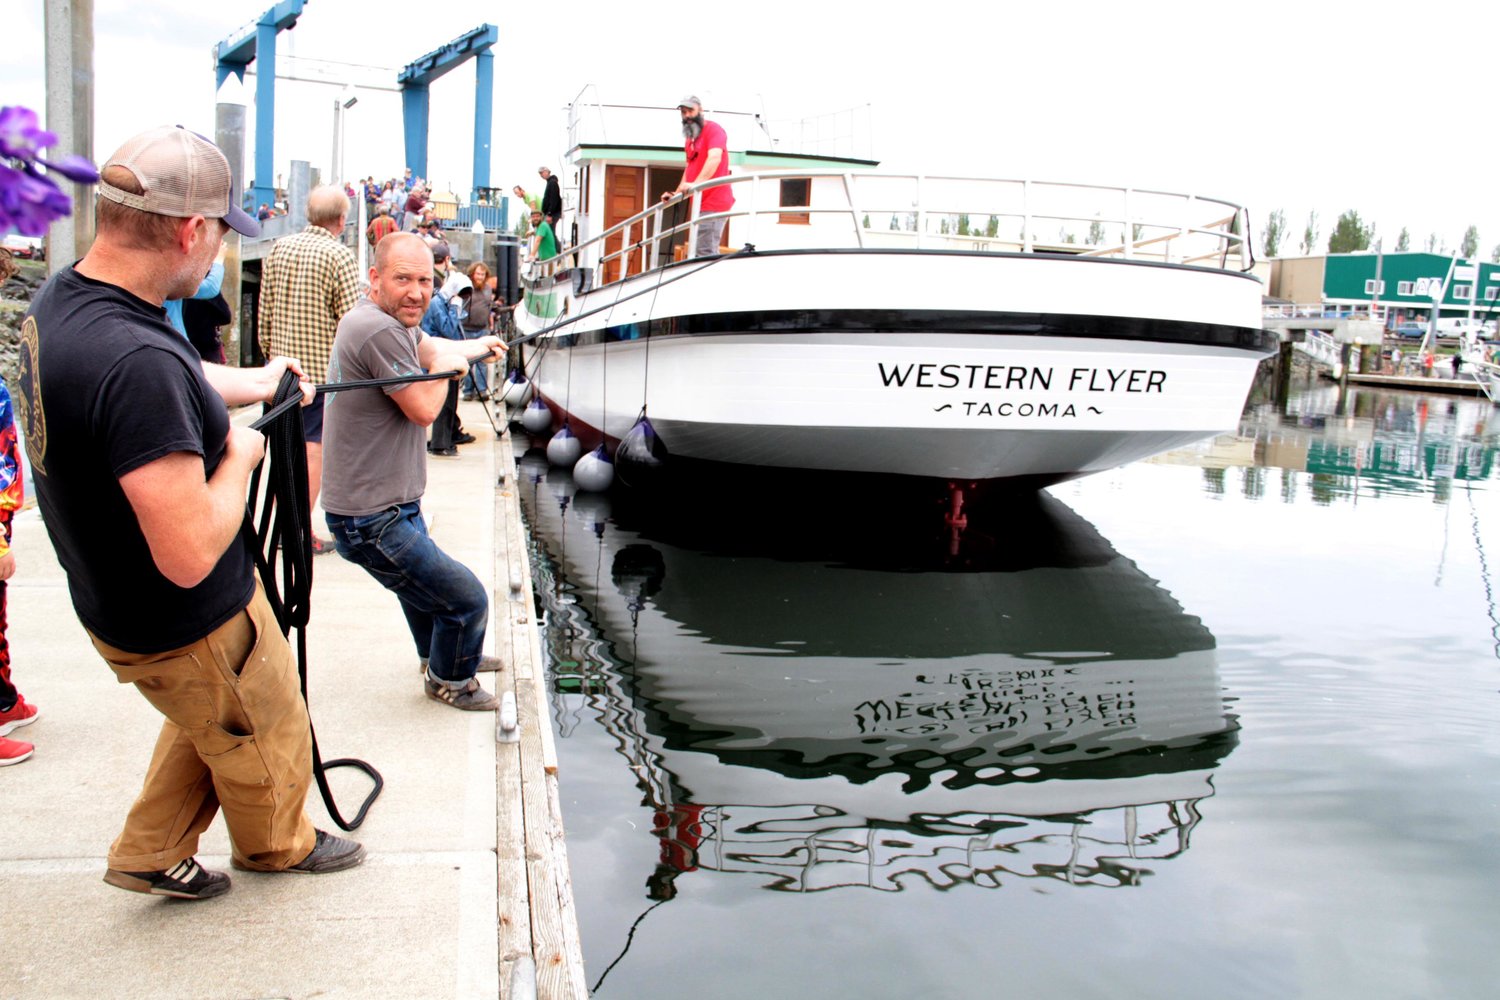 The Western Flyer is pulled to its temporary mooring spot before leaving Port Townsend under tug power.